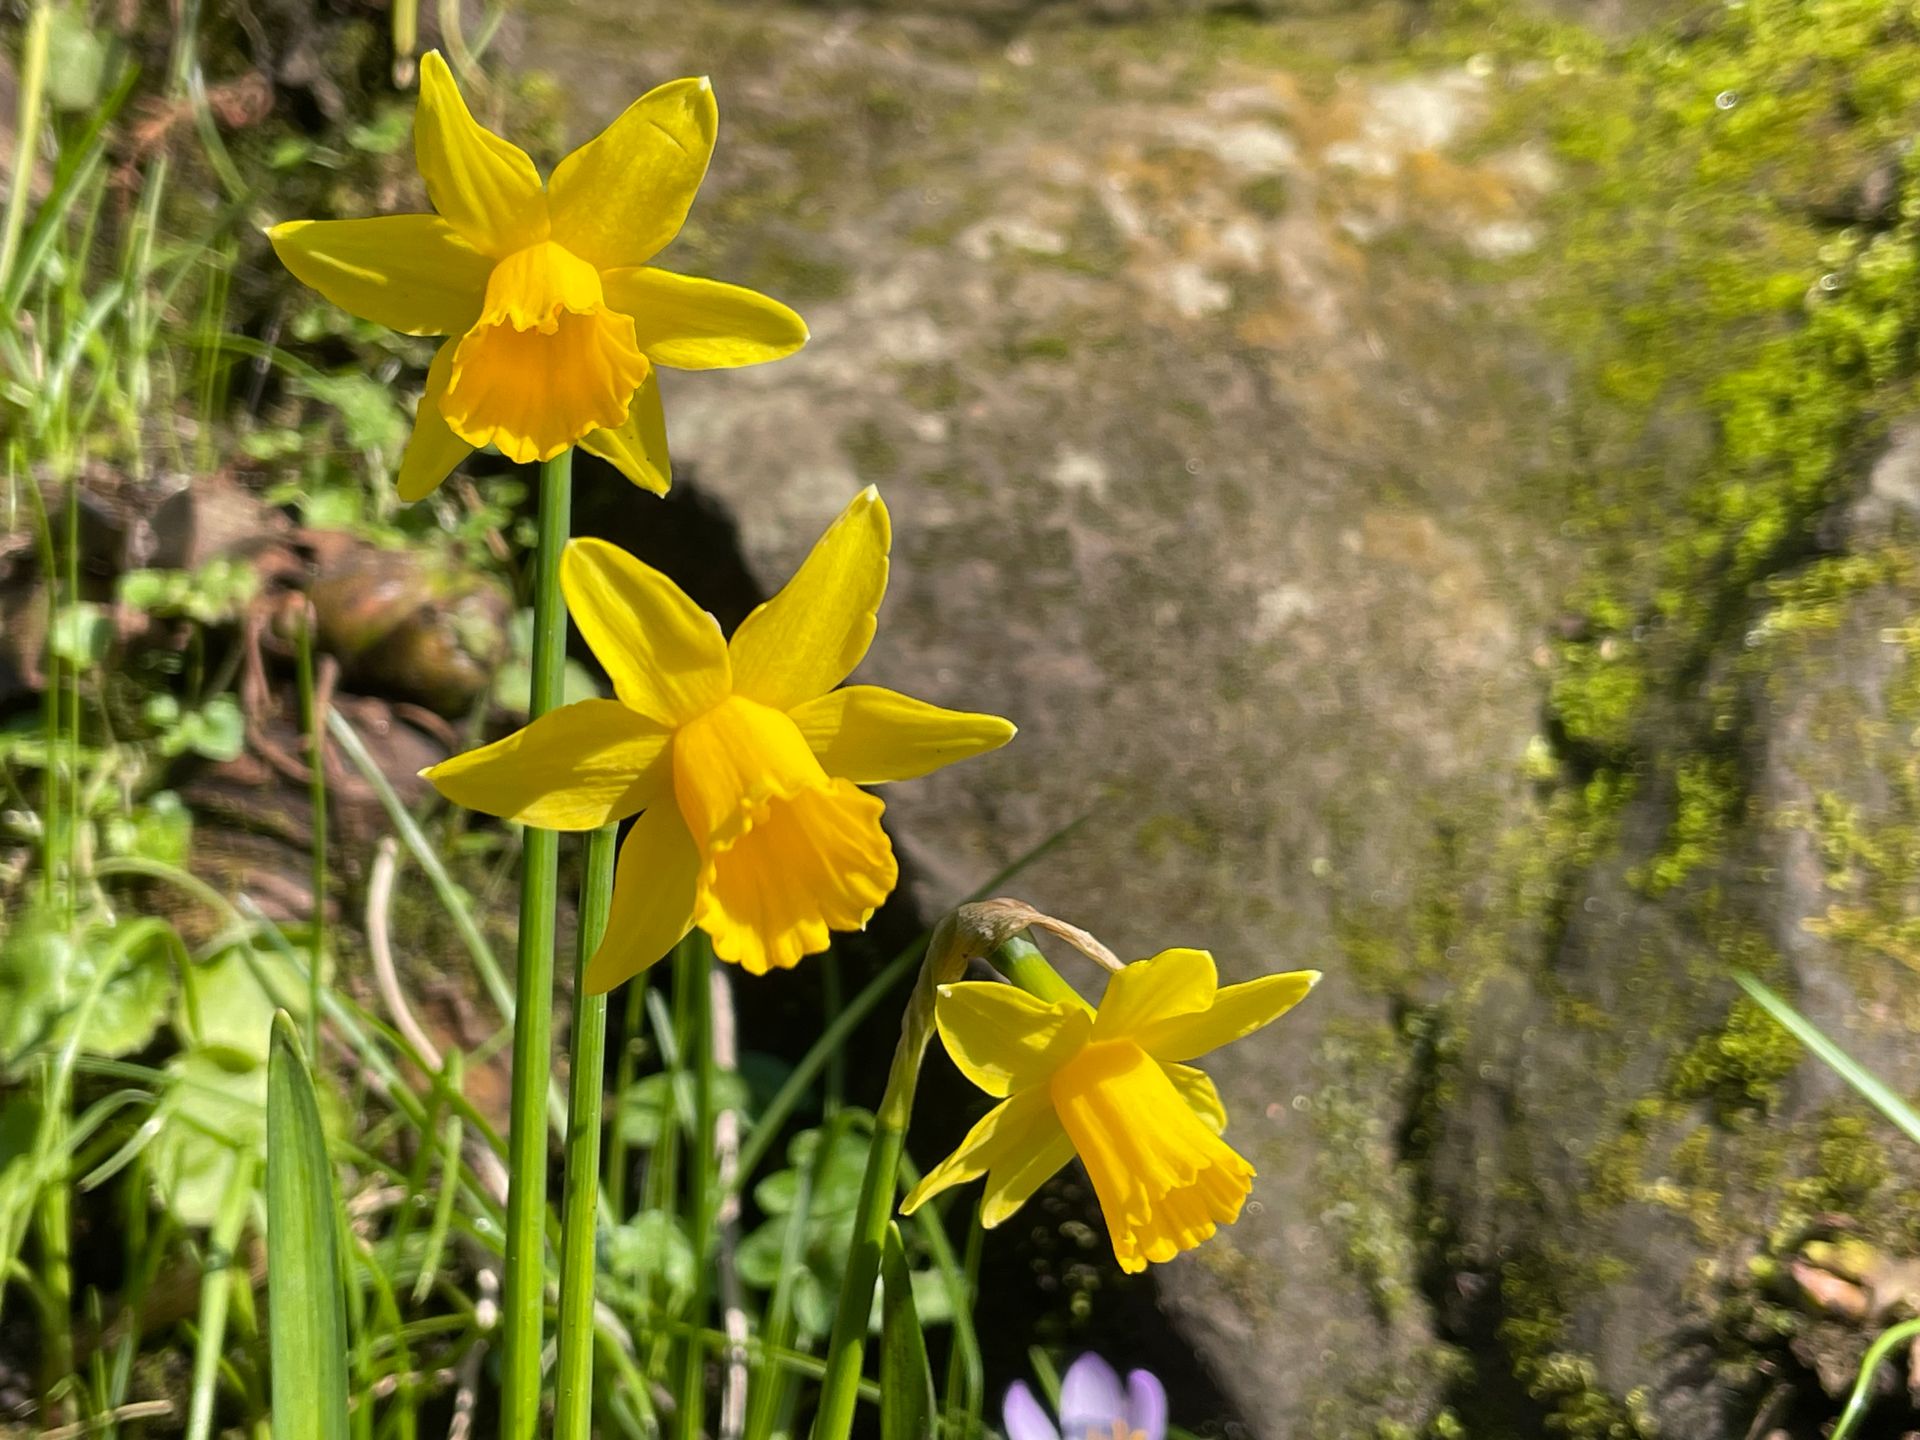 Three bright yellow narcissus flowers in a diagonal row, lit by bright sunshine. The background is split between green foliage and grey/brown rock.